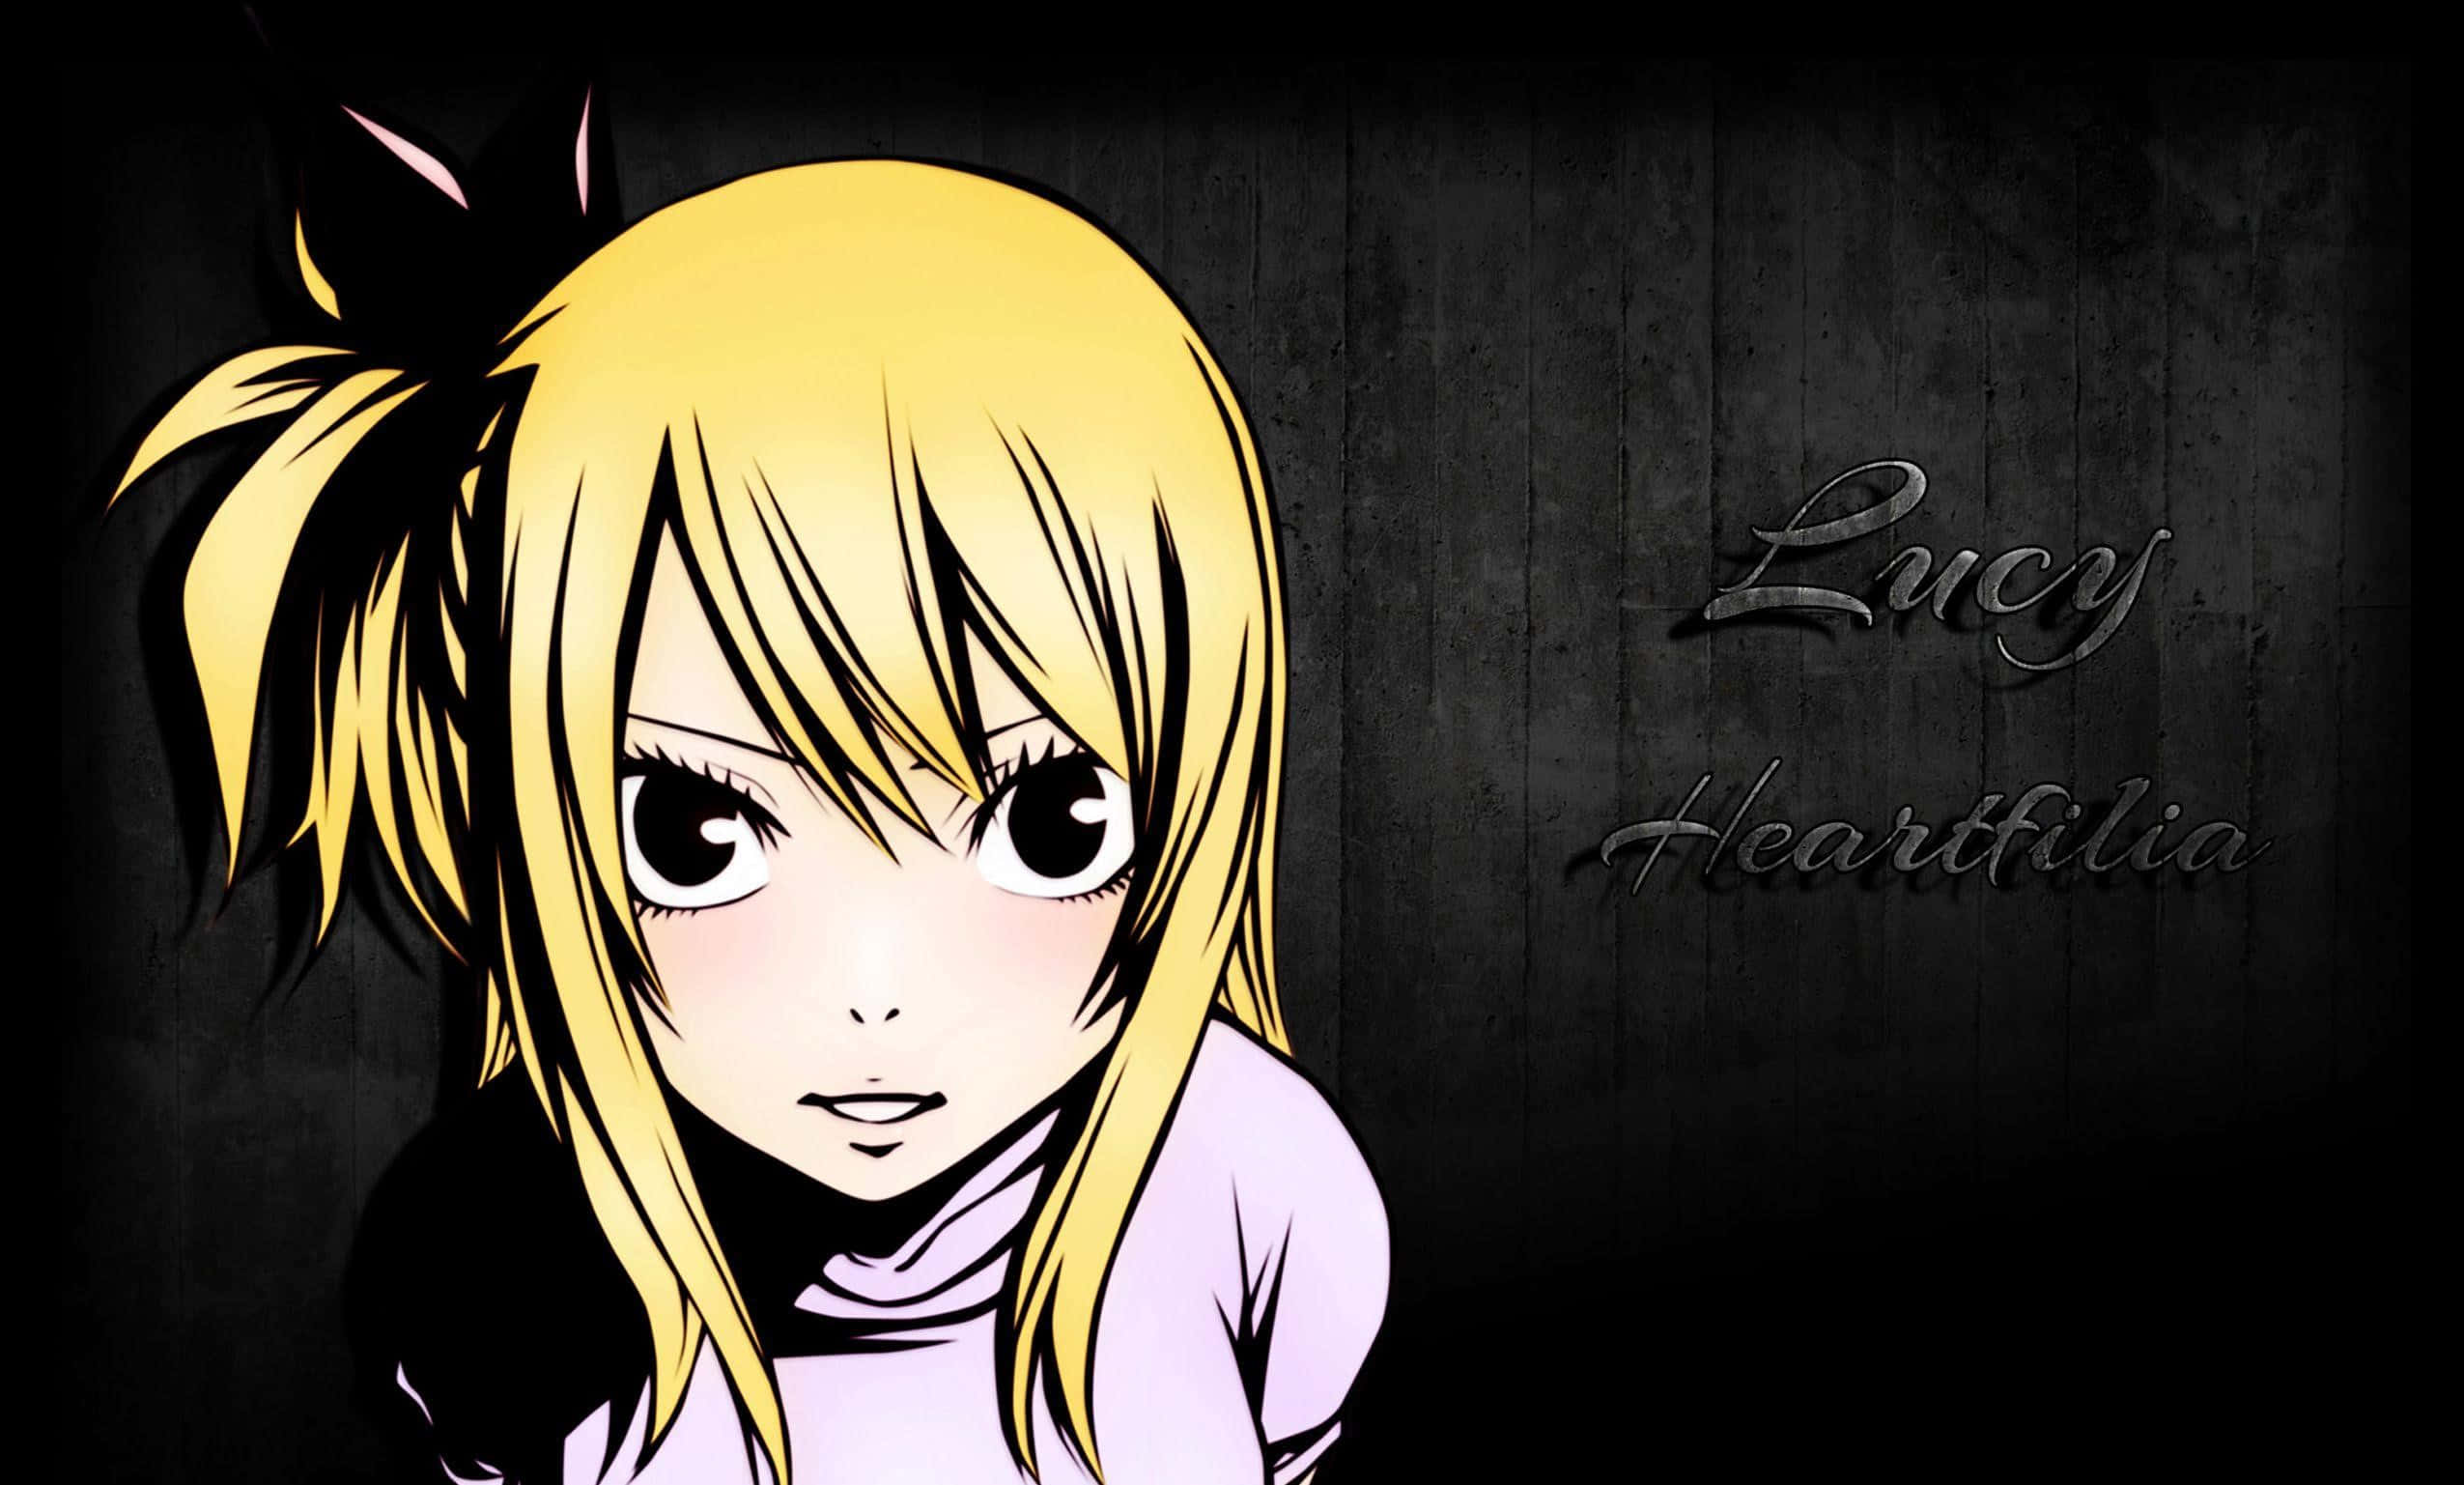 Caption: Lucy Heartfilia - Daring And Charming Fairy Tail Mage